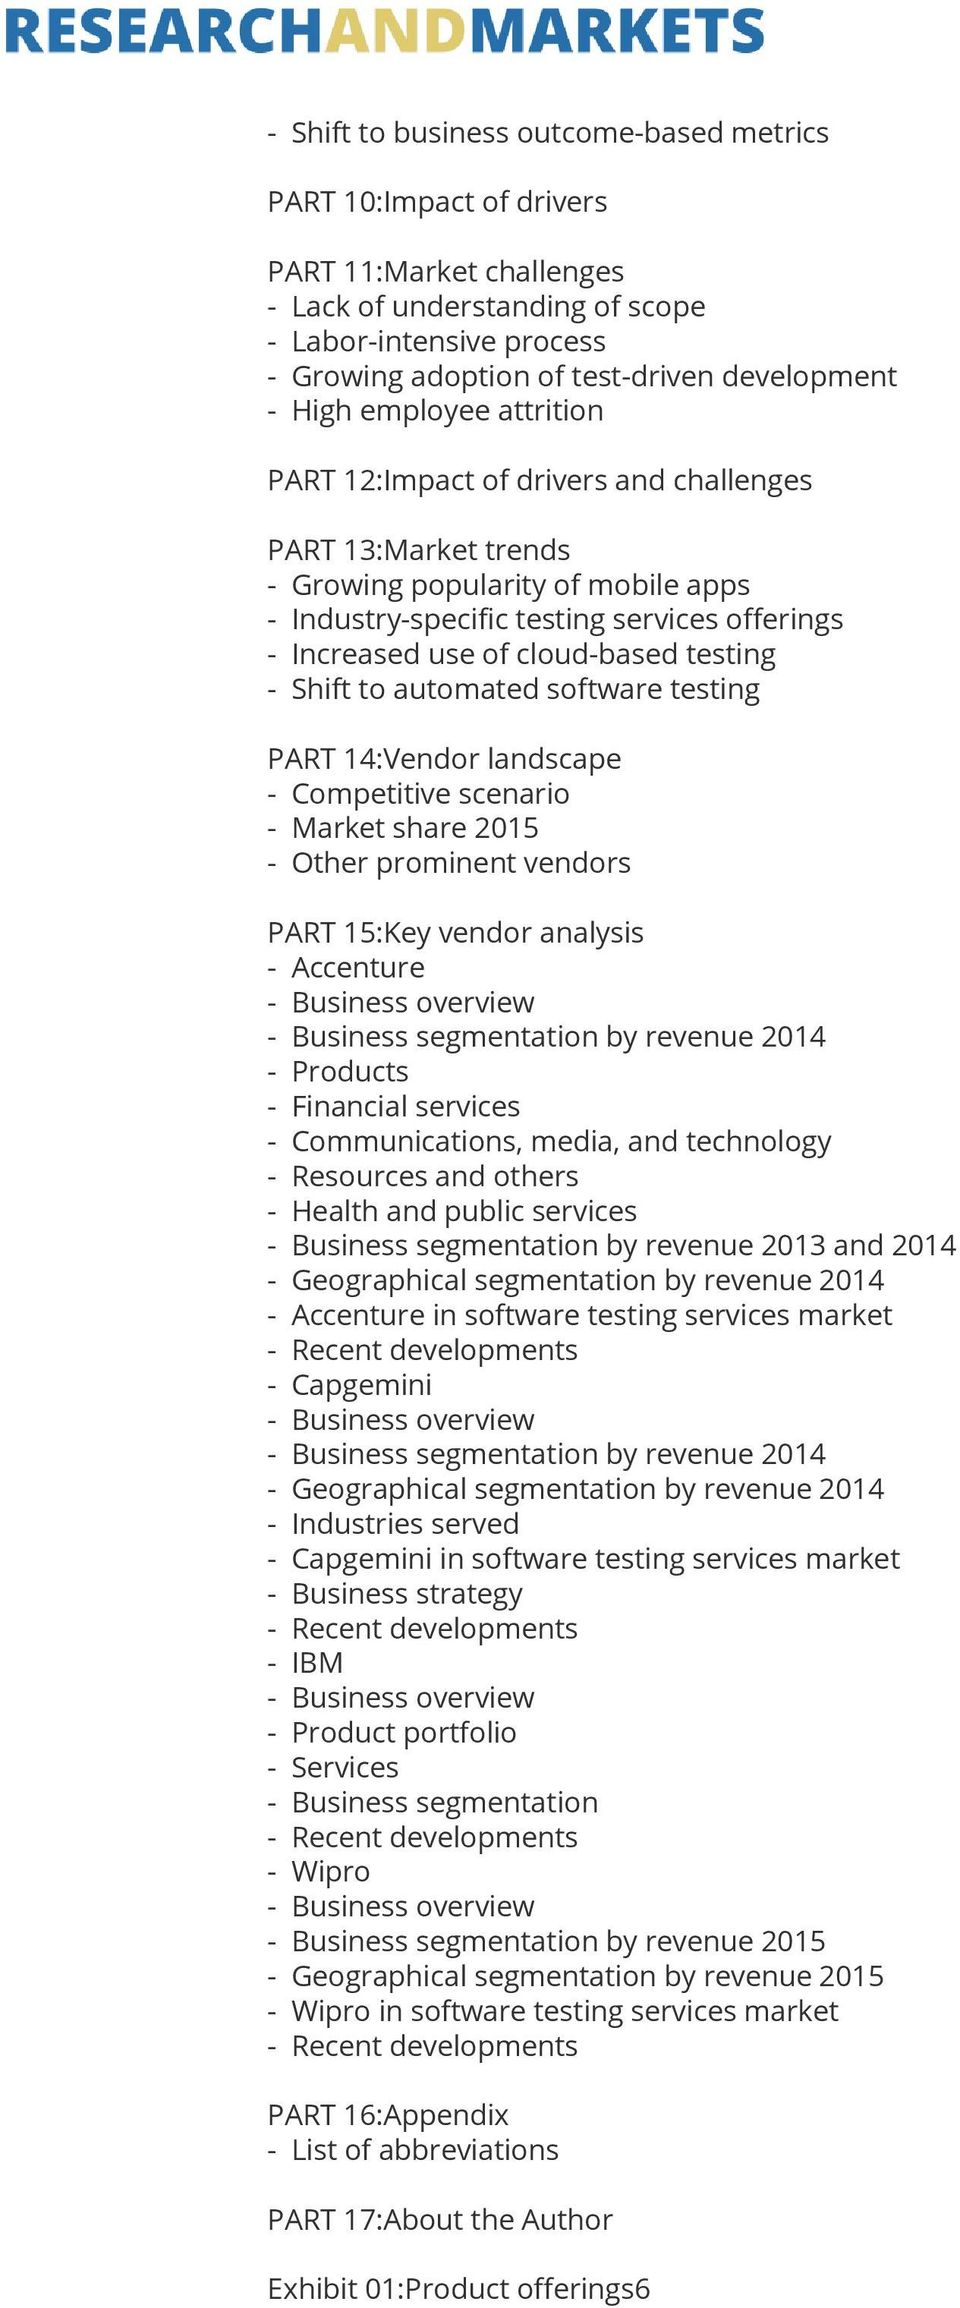 cloud-based testing - Shift to automated software testing PART 14:Vendor landscape - Competitive scenario - Market share 2015 - Other prominent vendors PART 15:Key vendor analysis - Accenture -